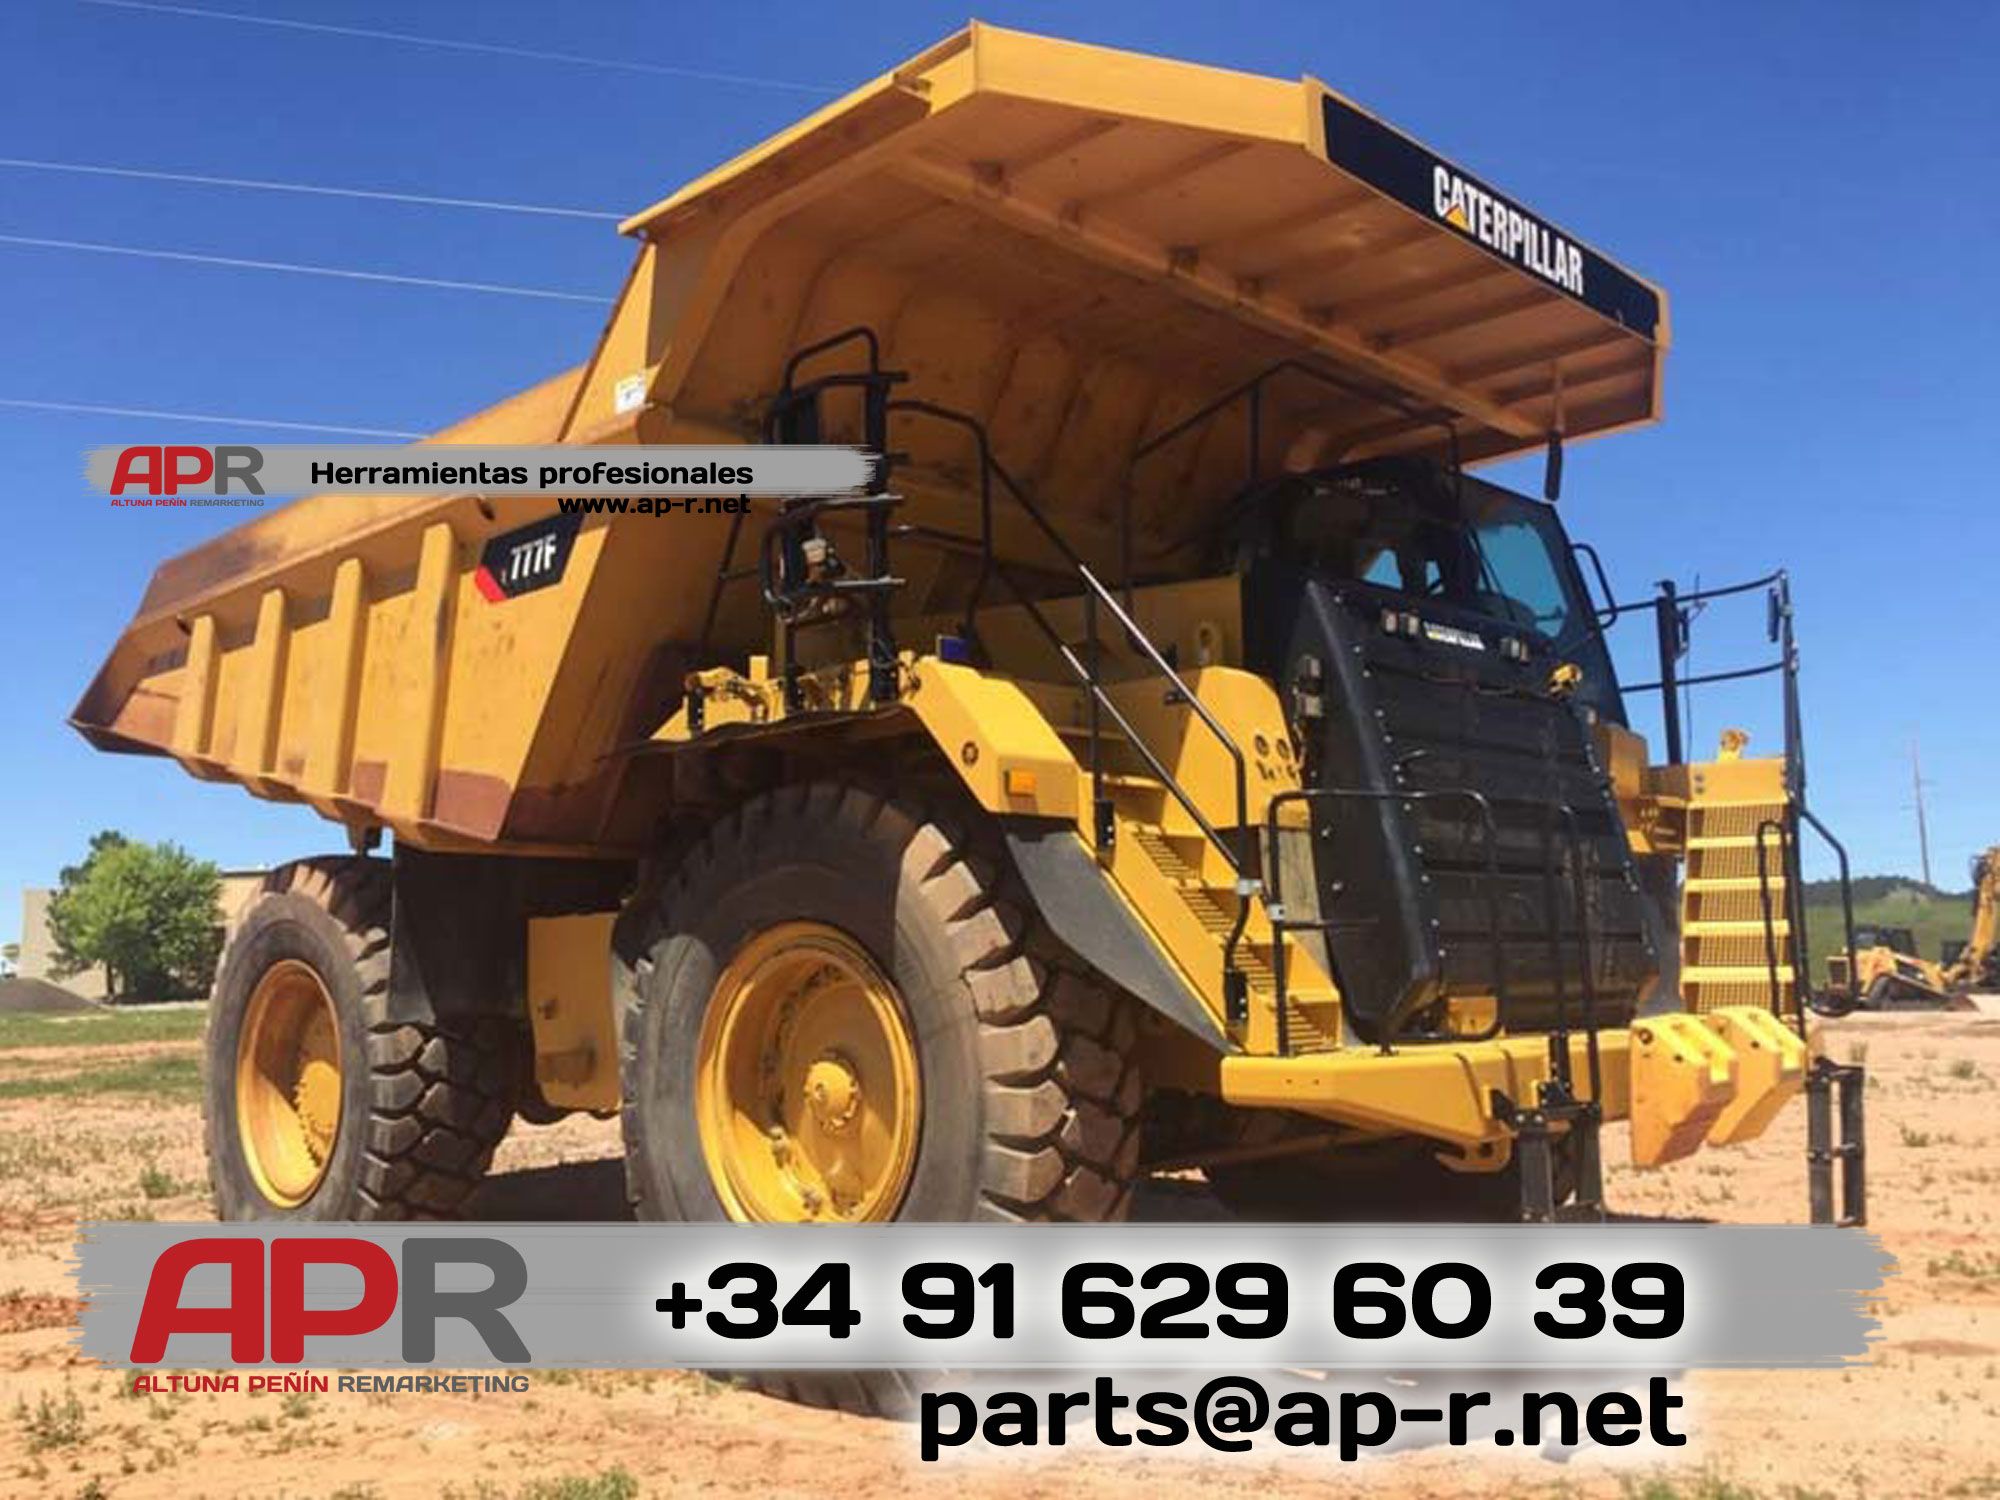 CATERPILLAR 777F used or rebuilt components